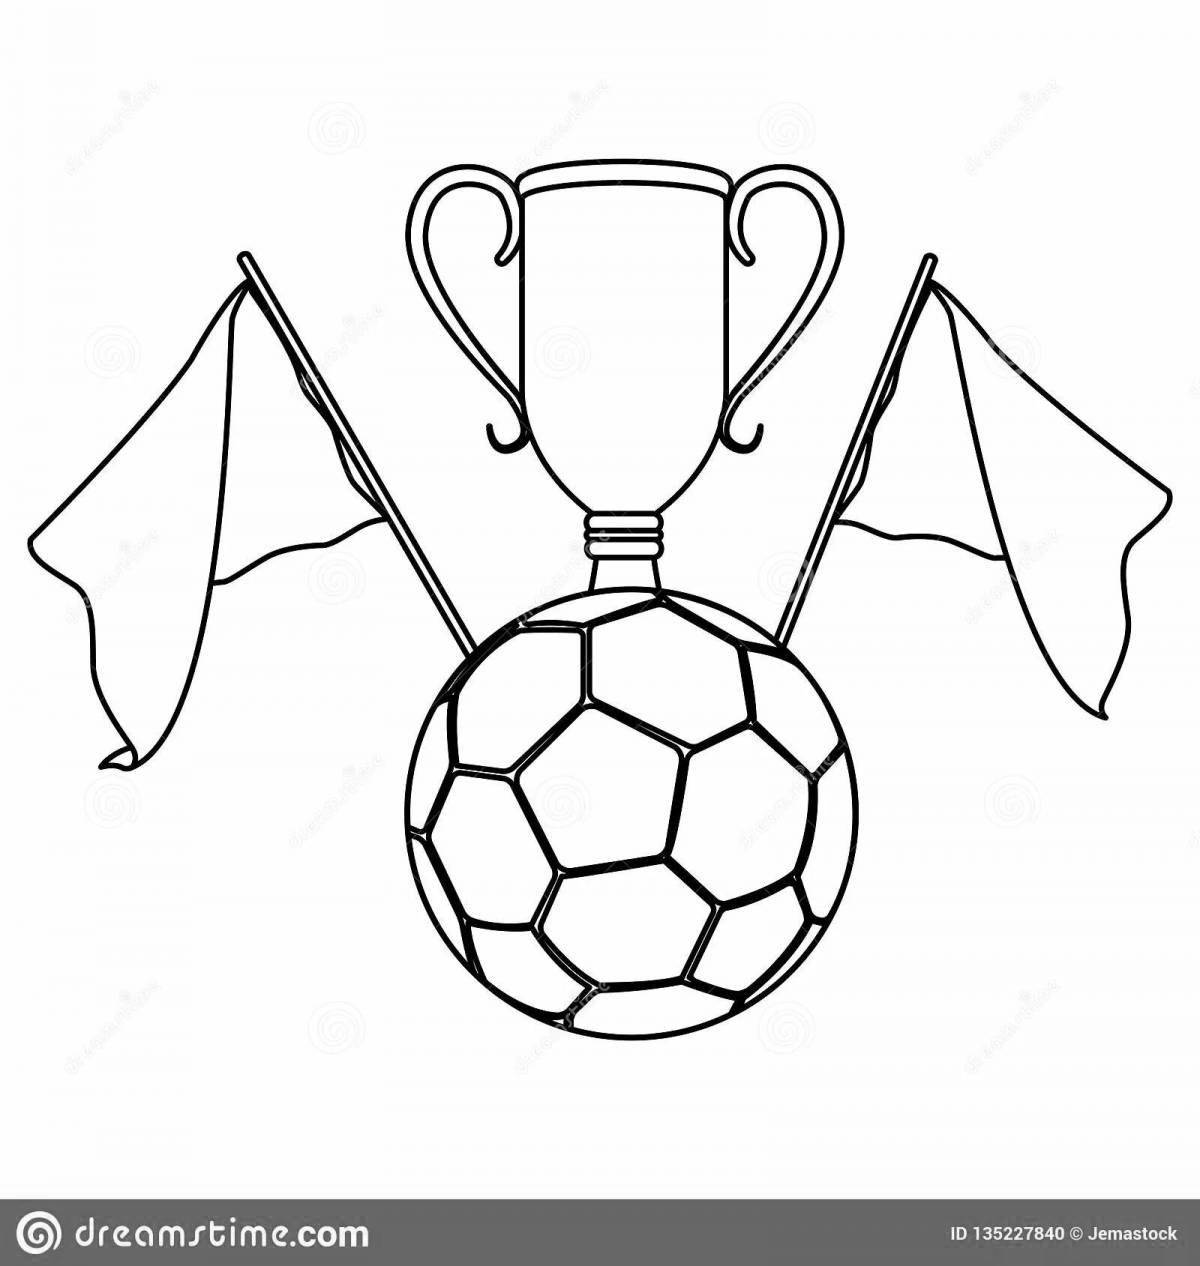 Coloring book shining football cup